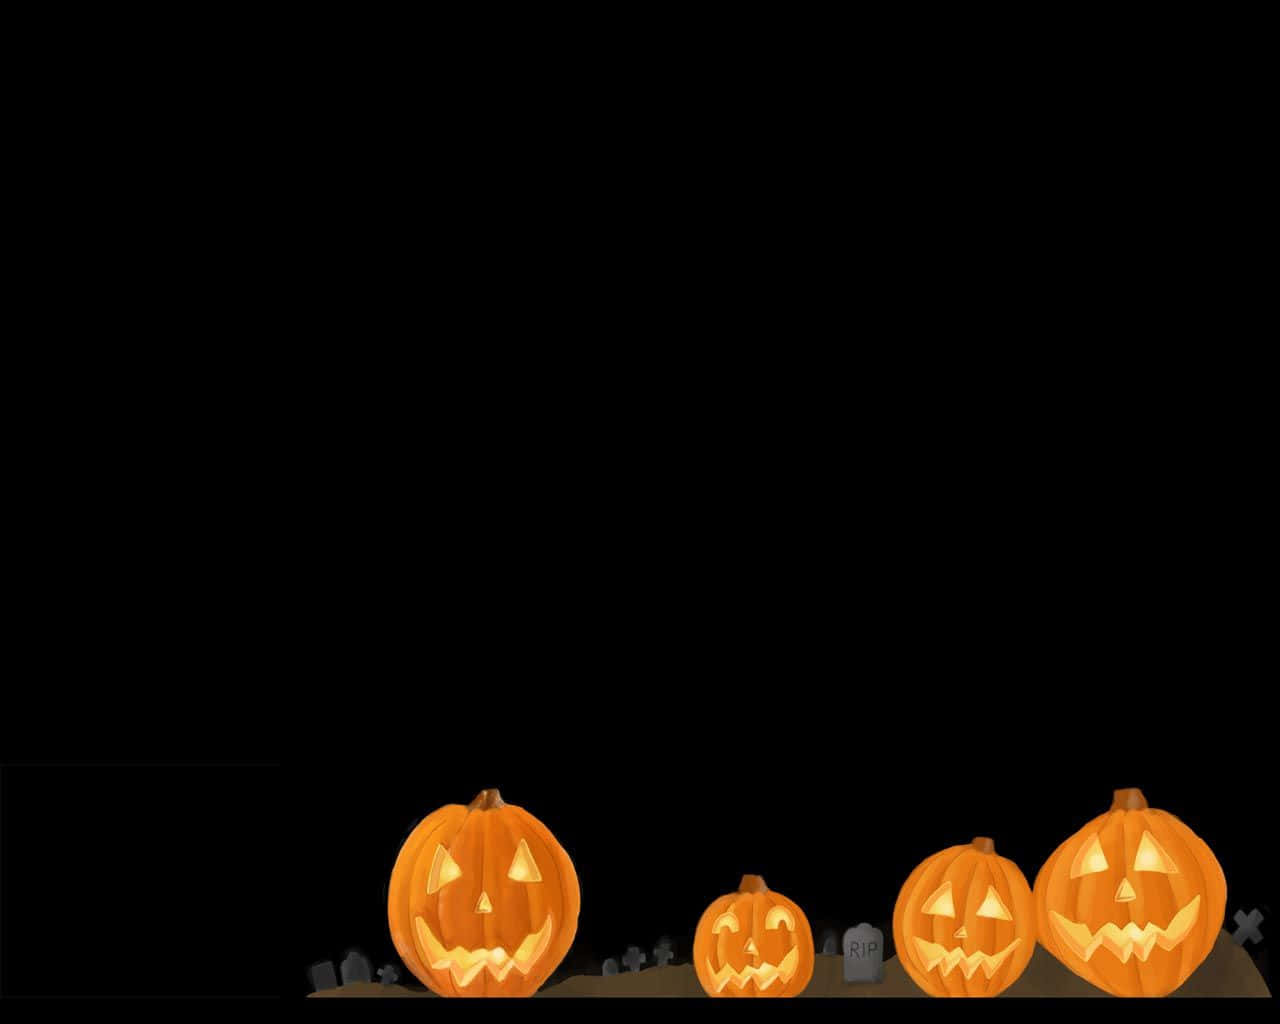 Celebrate Halloween with a minimalist touch Wallpaper